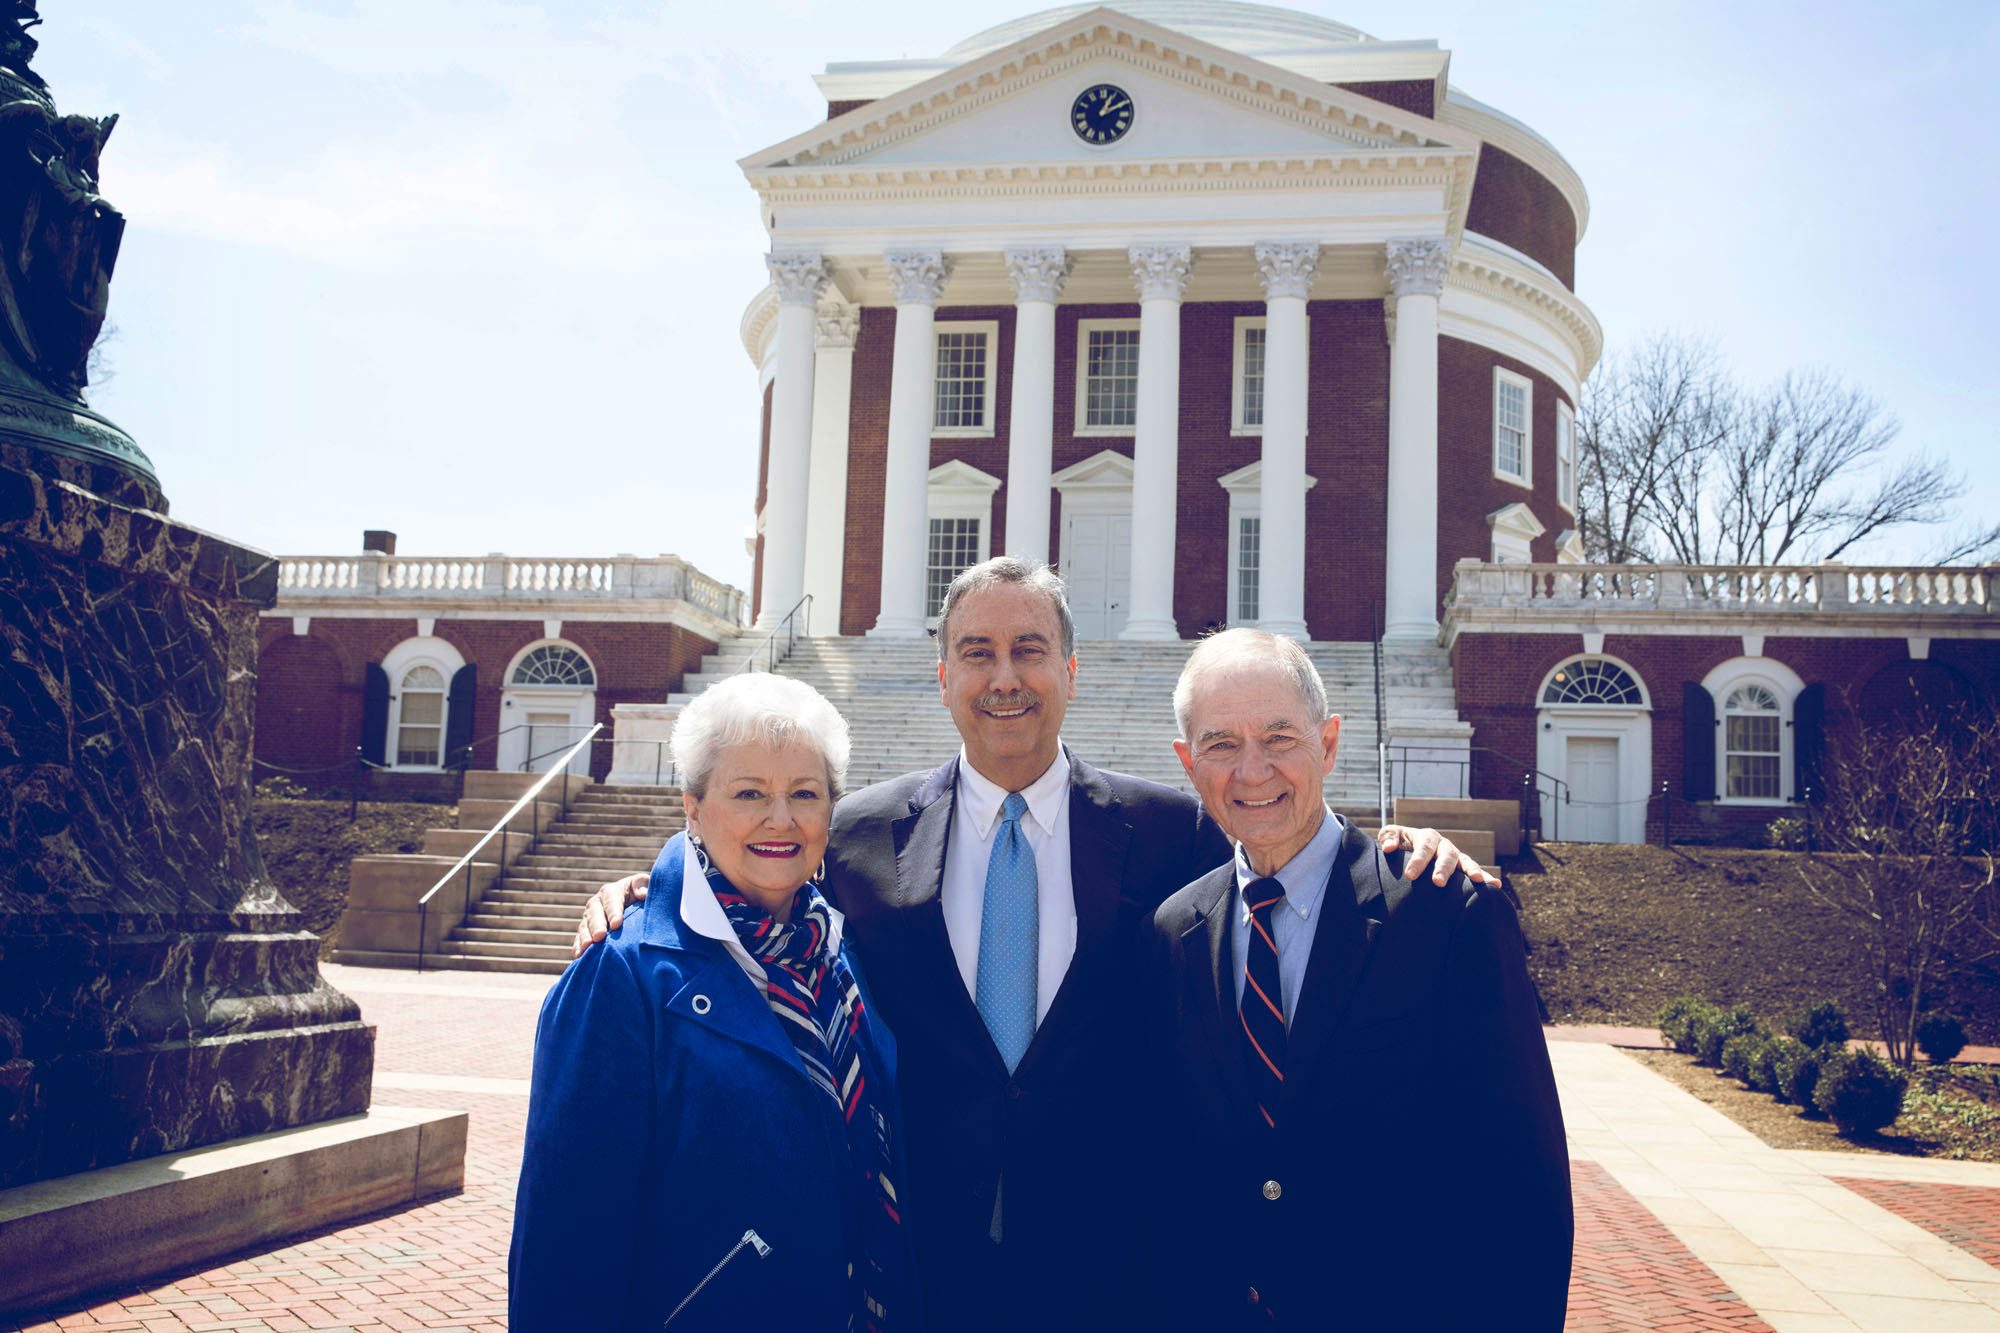 Larry Sabato, center, and Leonard and Jerry Sandridge stand together in front of the Rotunda